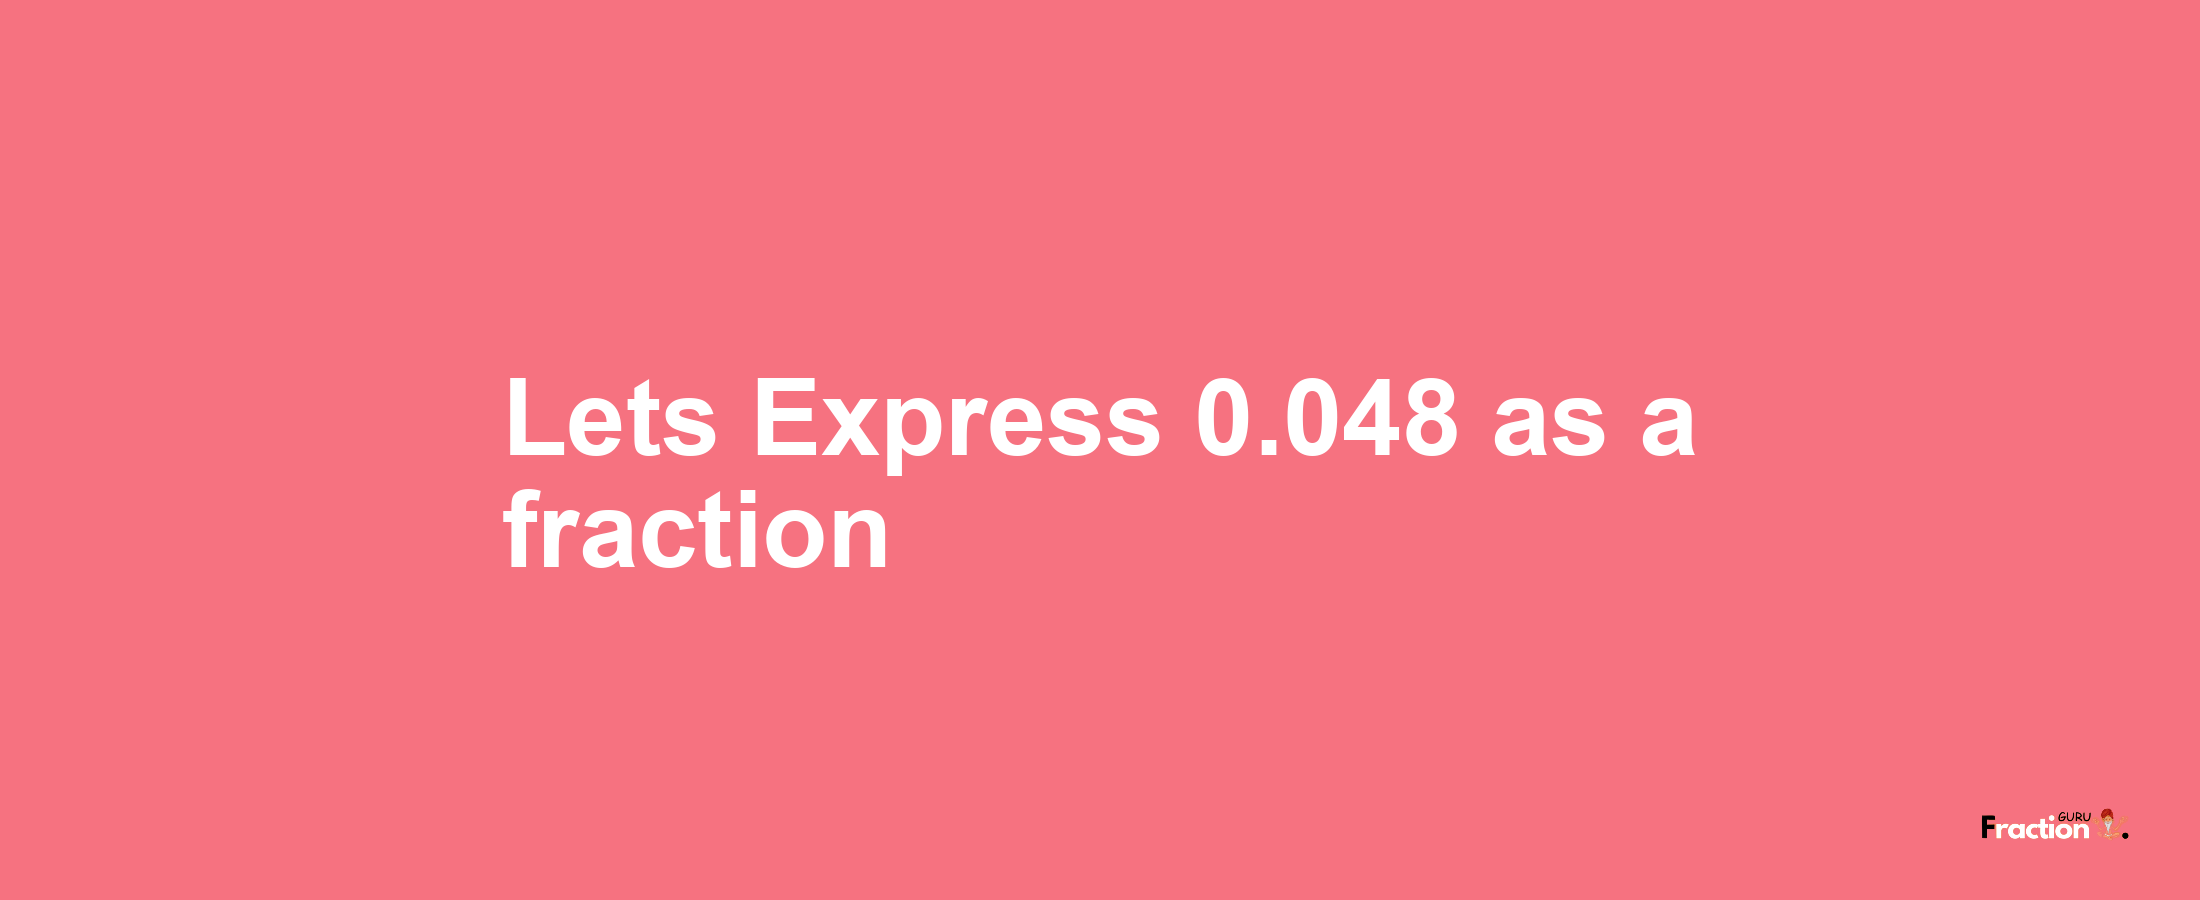 Lets Express 0.048 as afraction